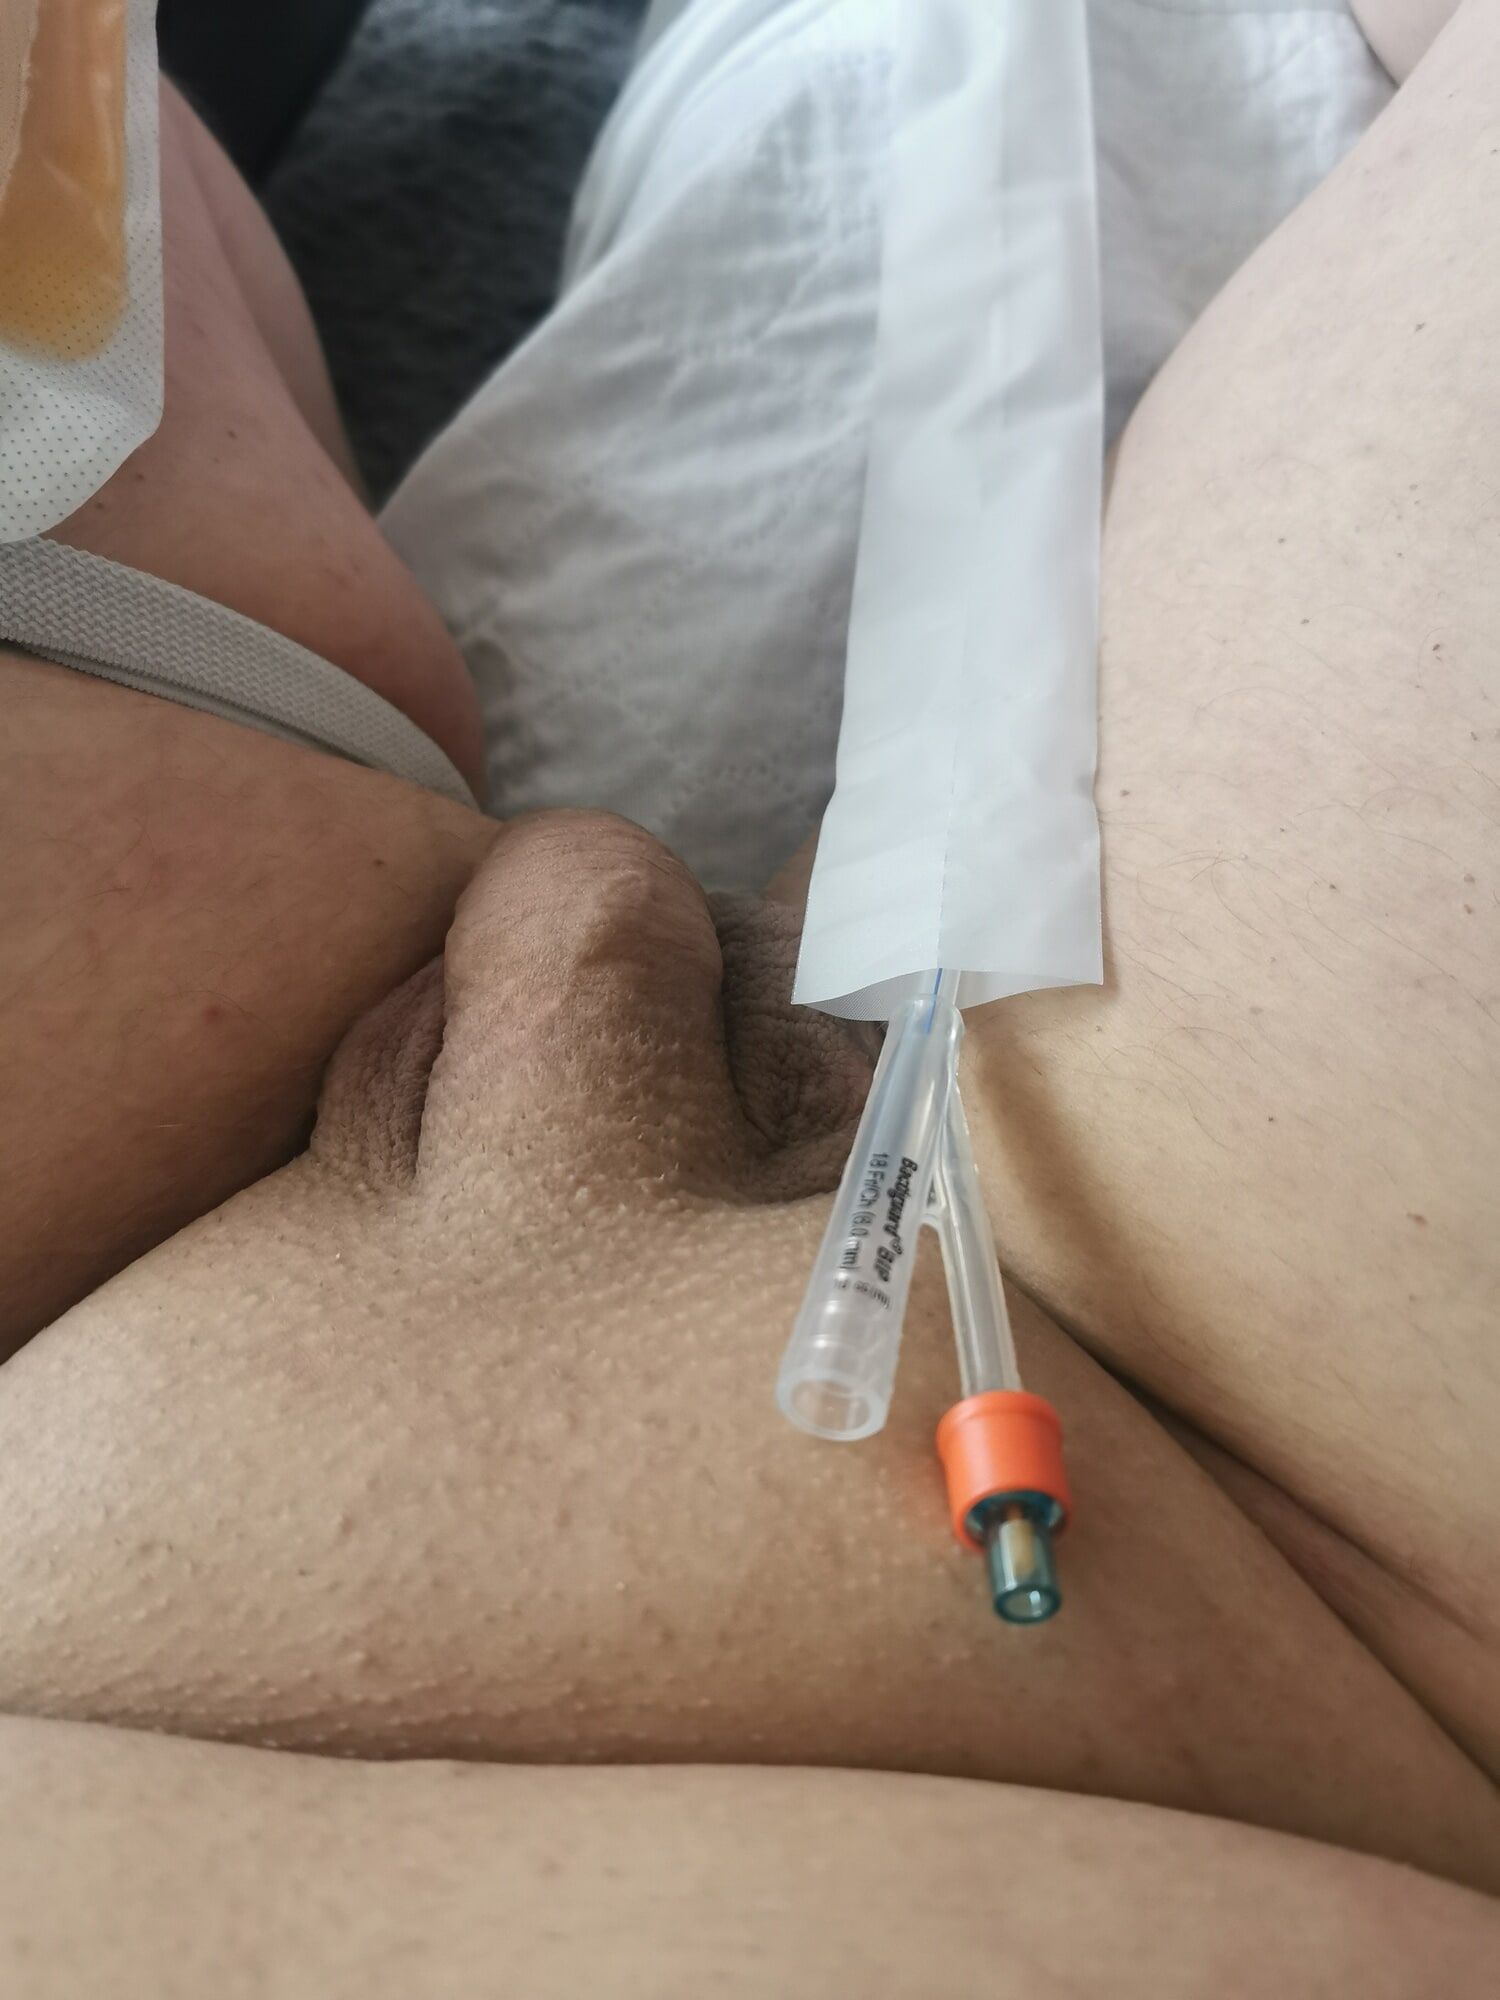 Time to insert my catheter #5